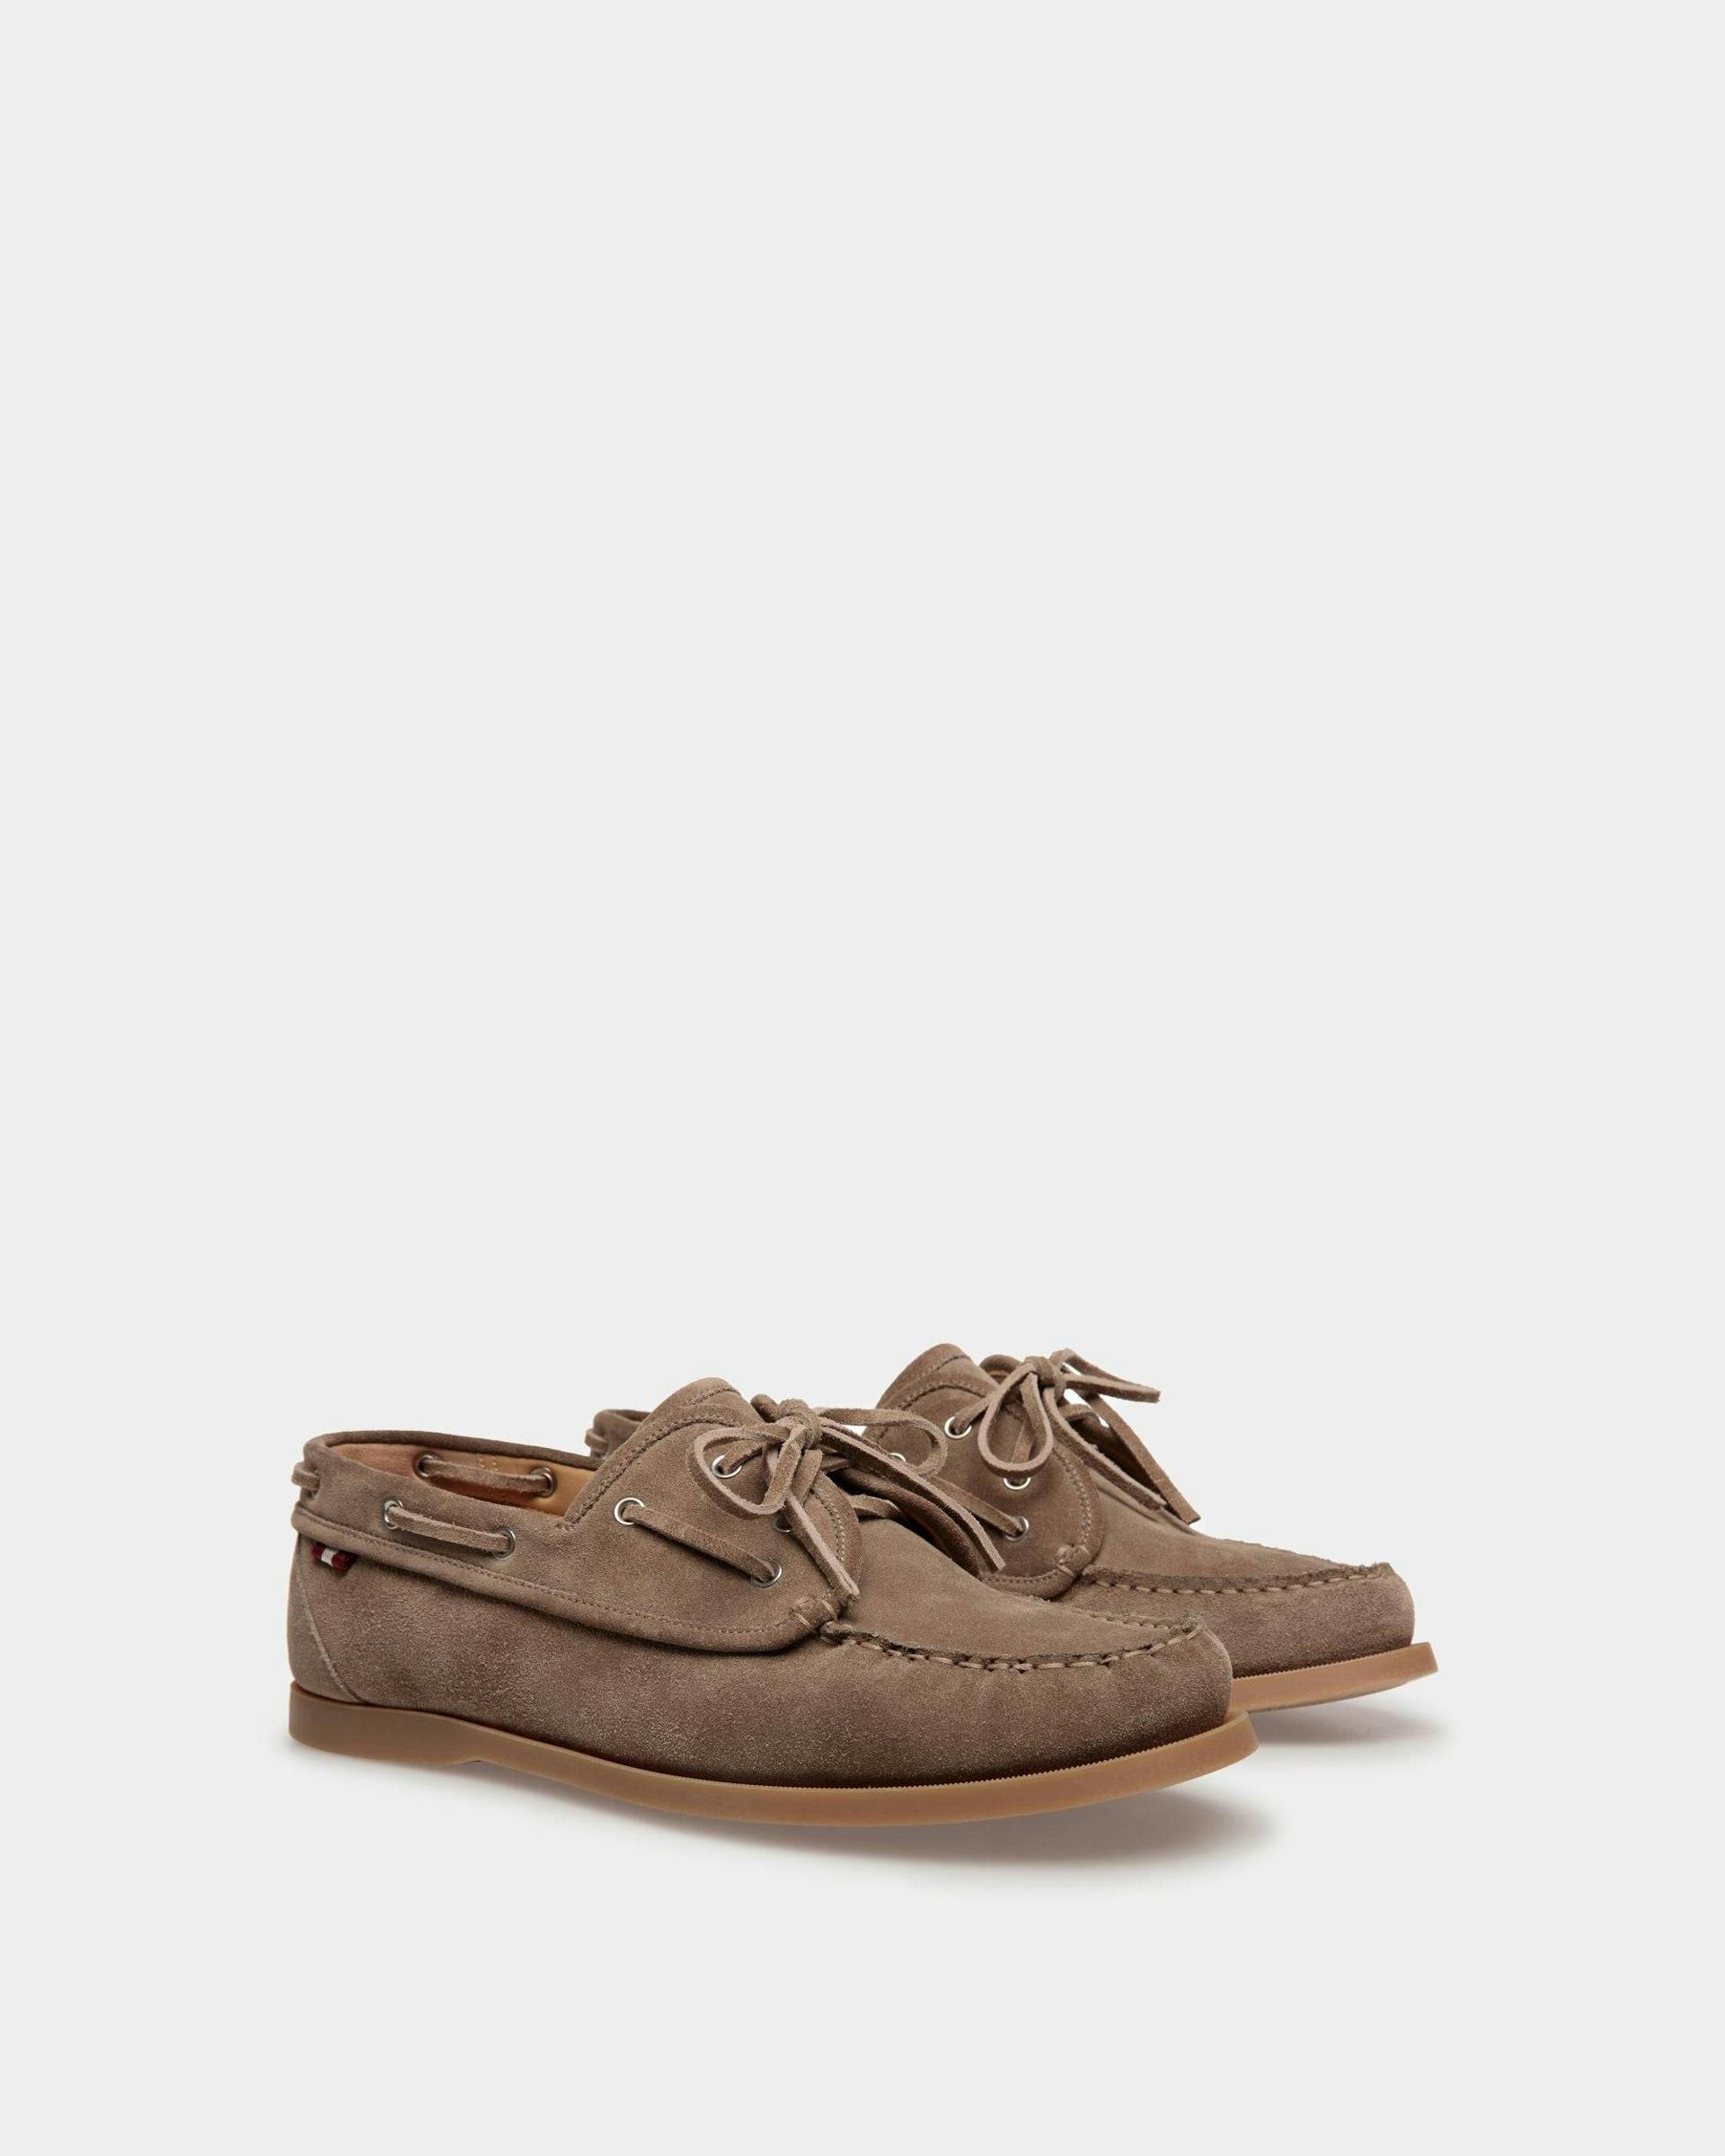 Men's Nelson Loafer in Beige Suede Leather | Bally | Still Life 3/4 Front